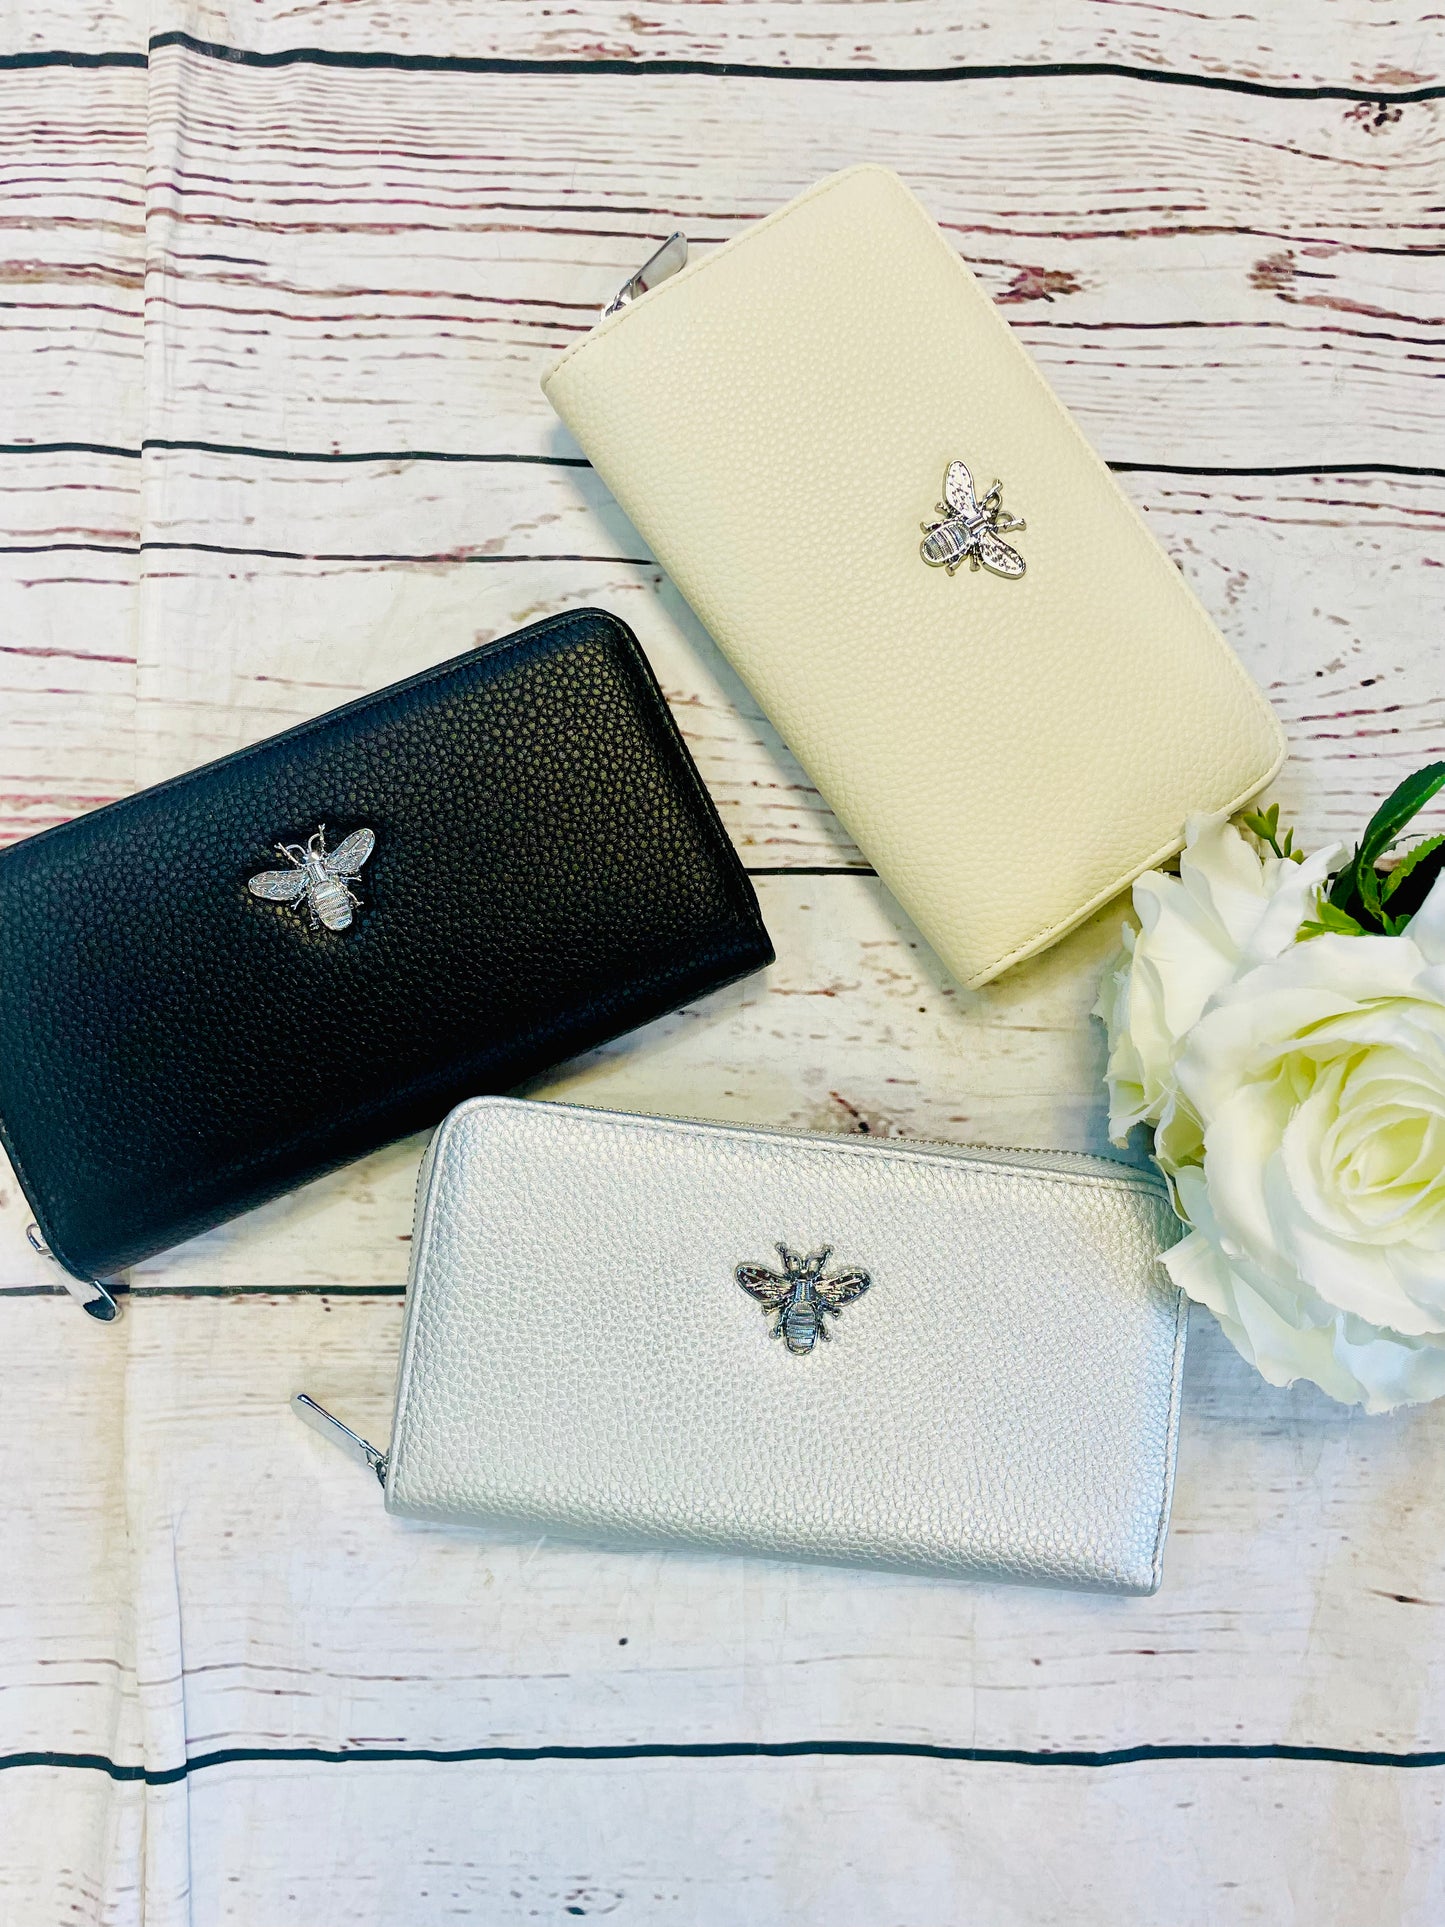 The DAISY purse with silver bee badge